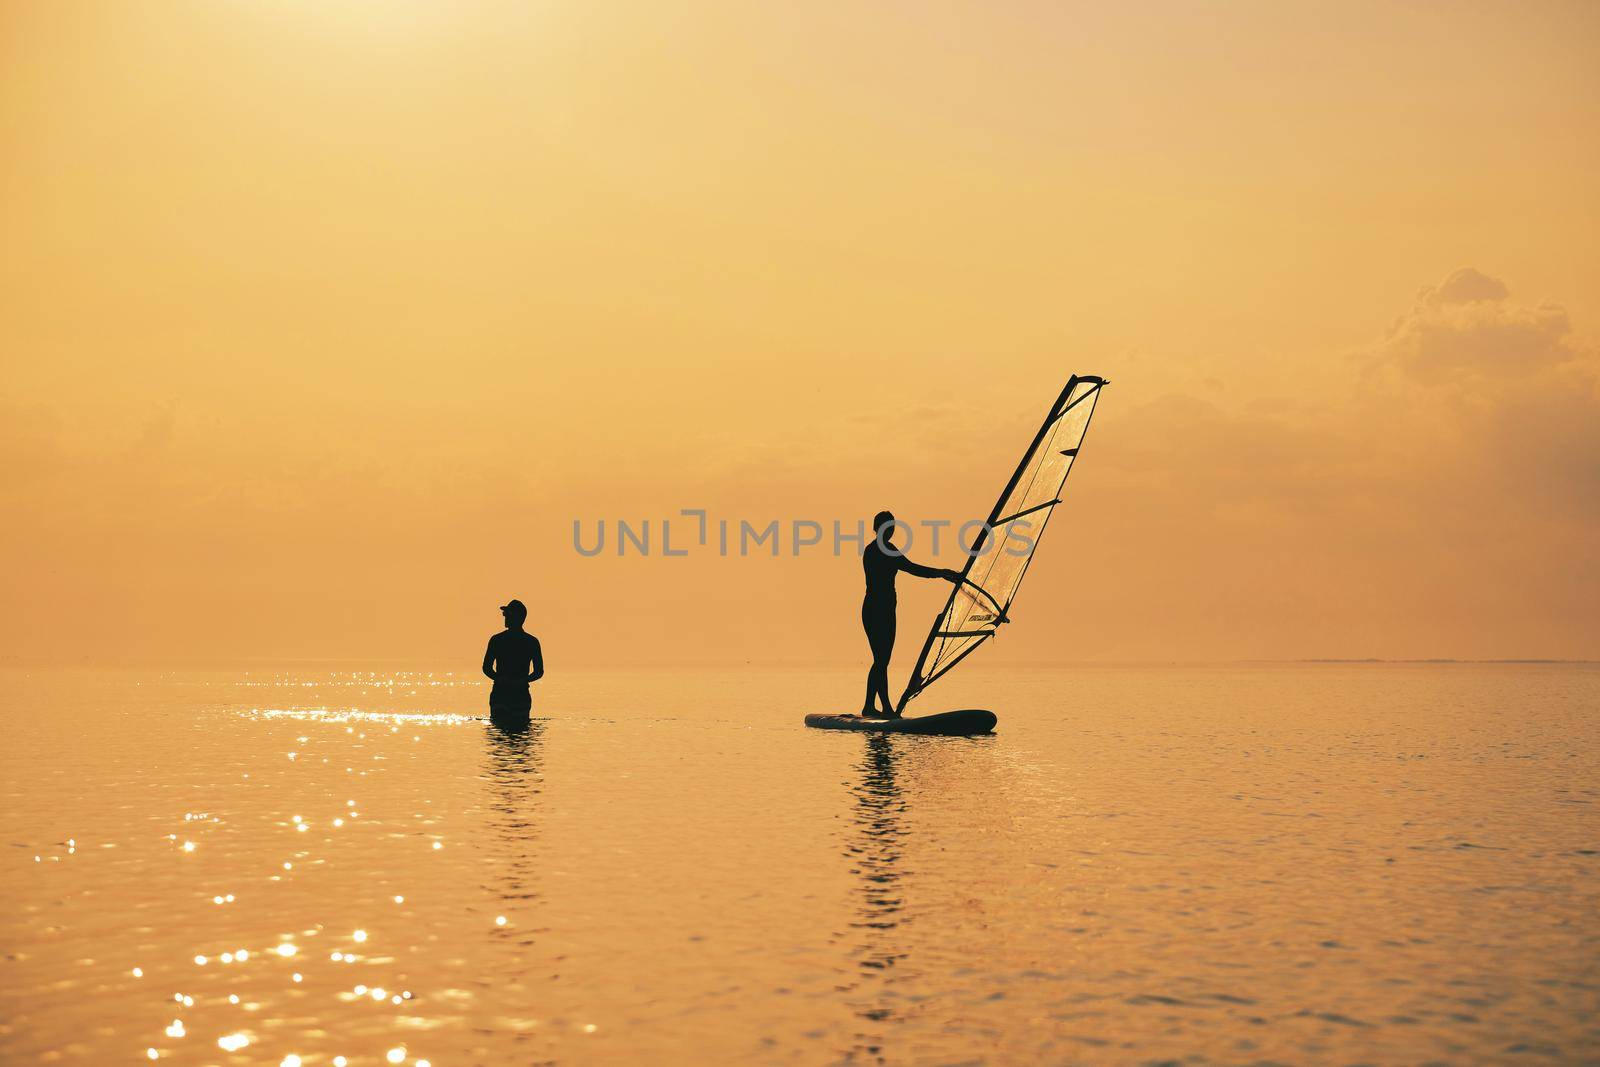 Sunset on the sea with silhouette of Girl with a Paddle on a SUP board. Sports download image